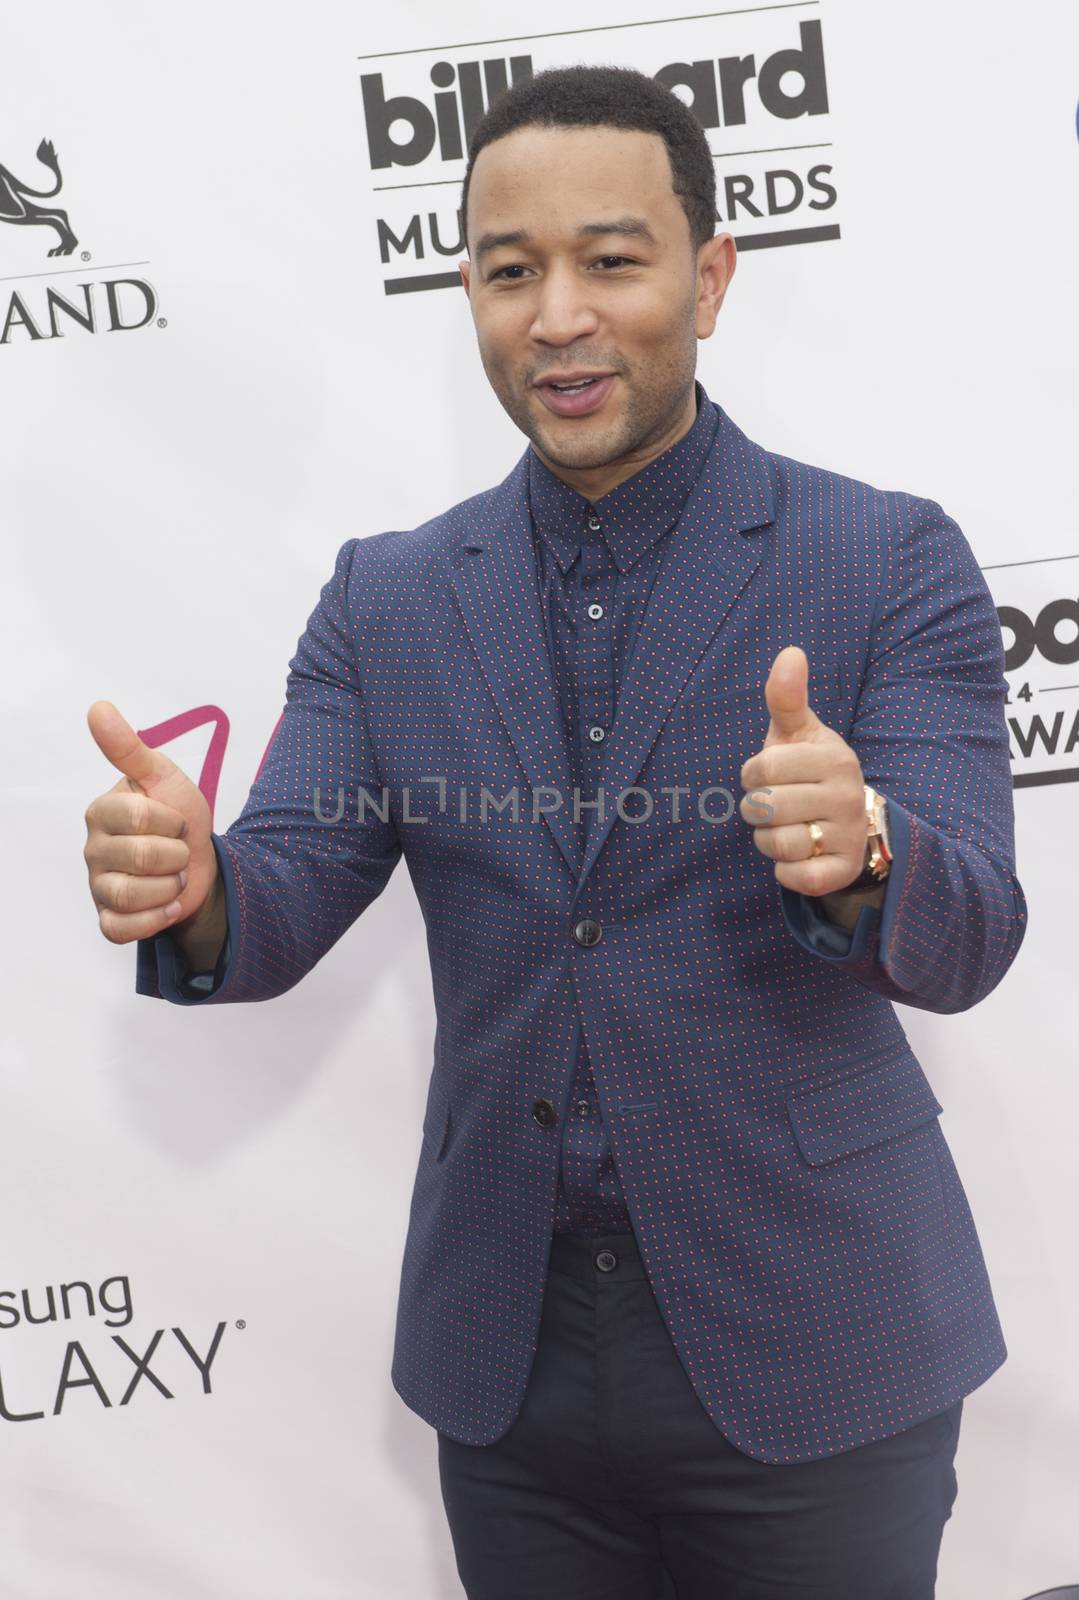 LAS VEGAS - MAY 18 : Singer/songwriter John Legend attend the 2014 Billboard Music Awards at the MGM Grand Garden Arena on May 18 , 2014 in Las Vegas.